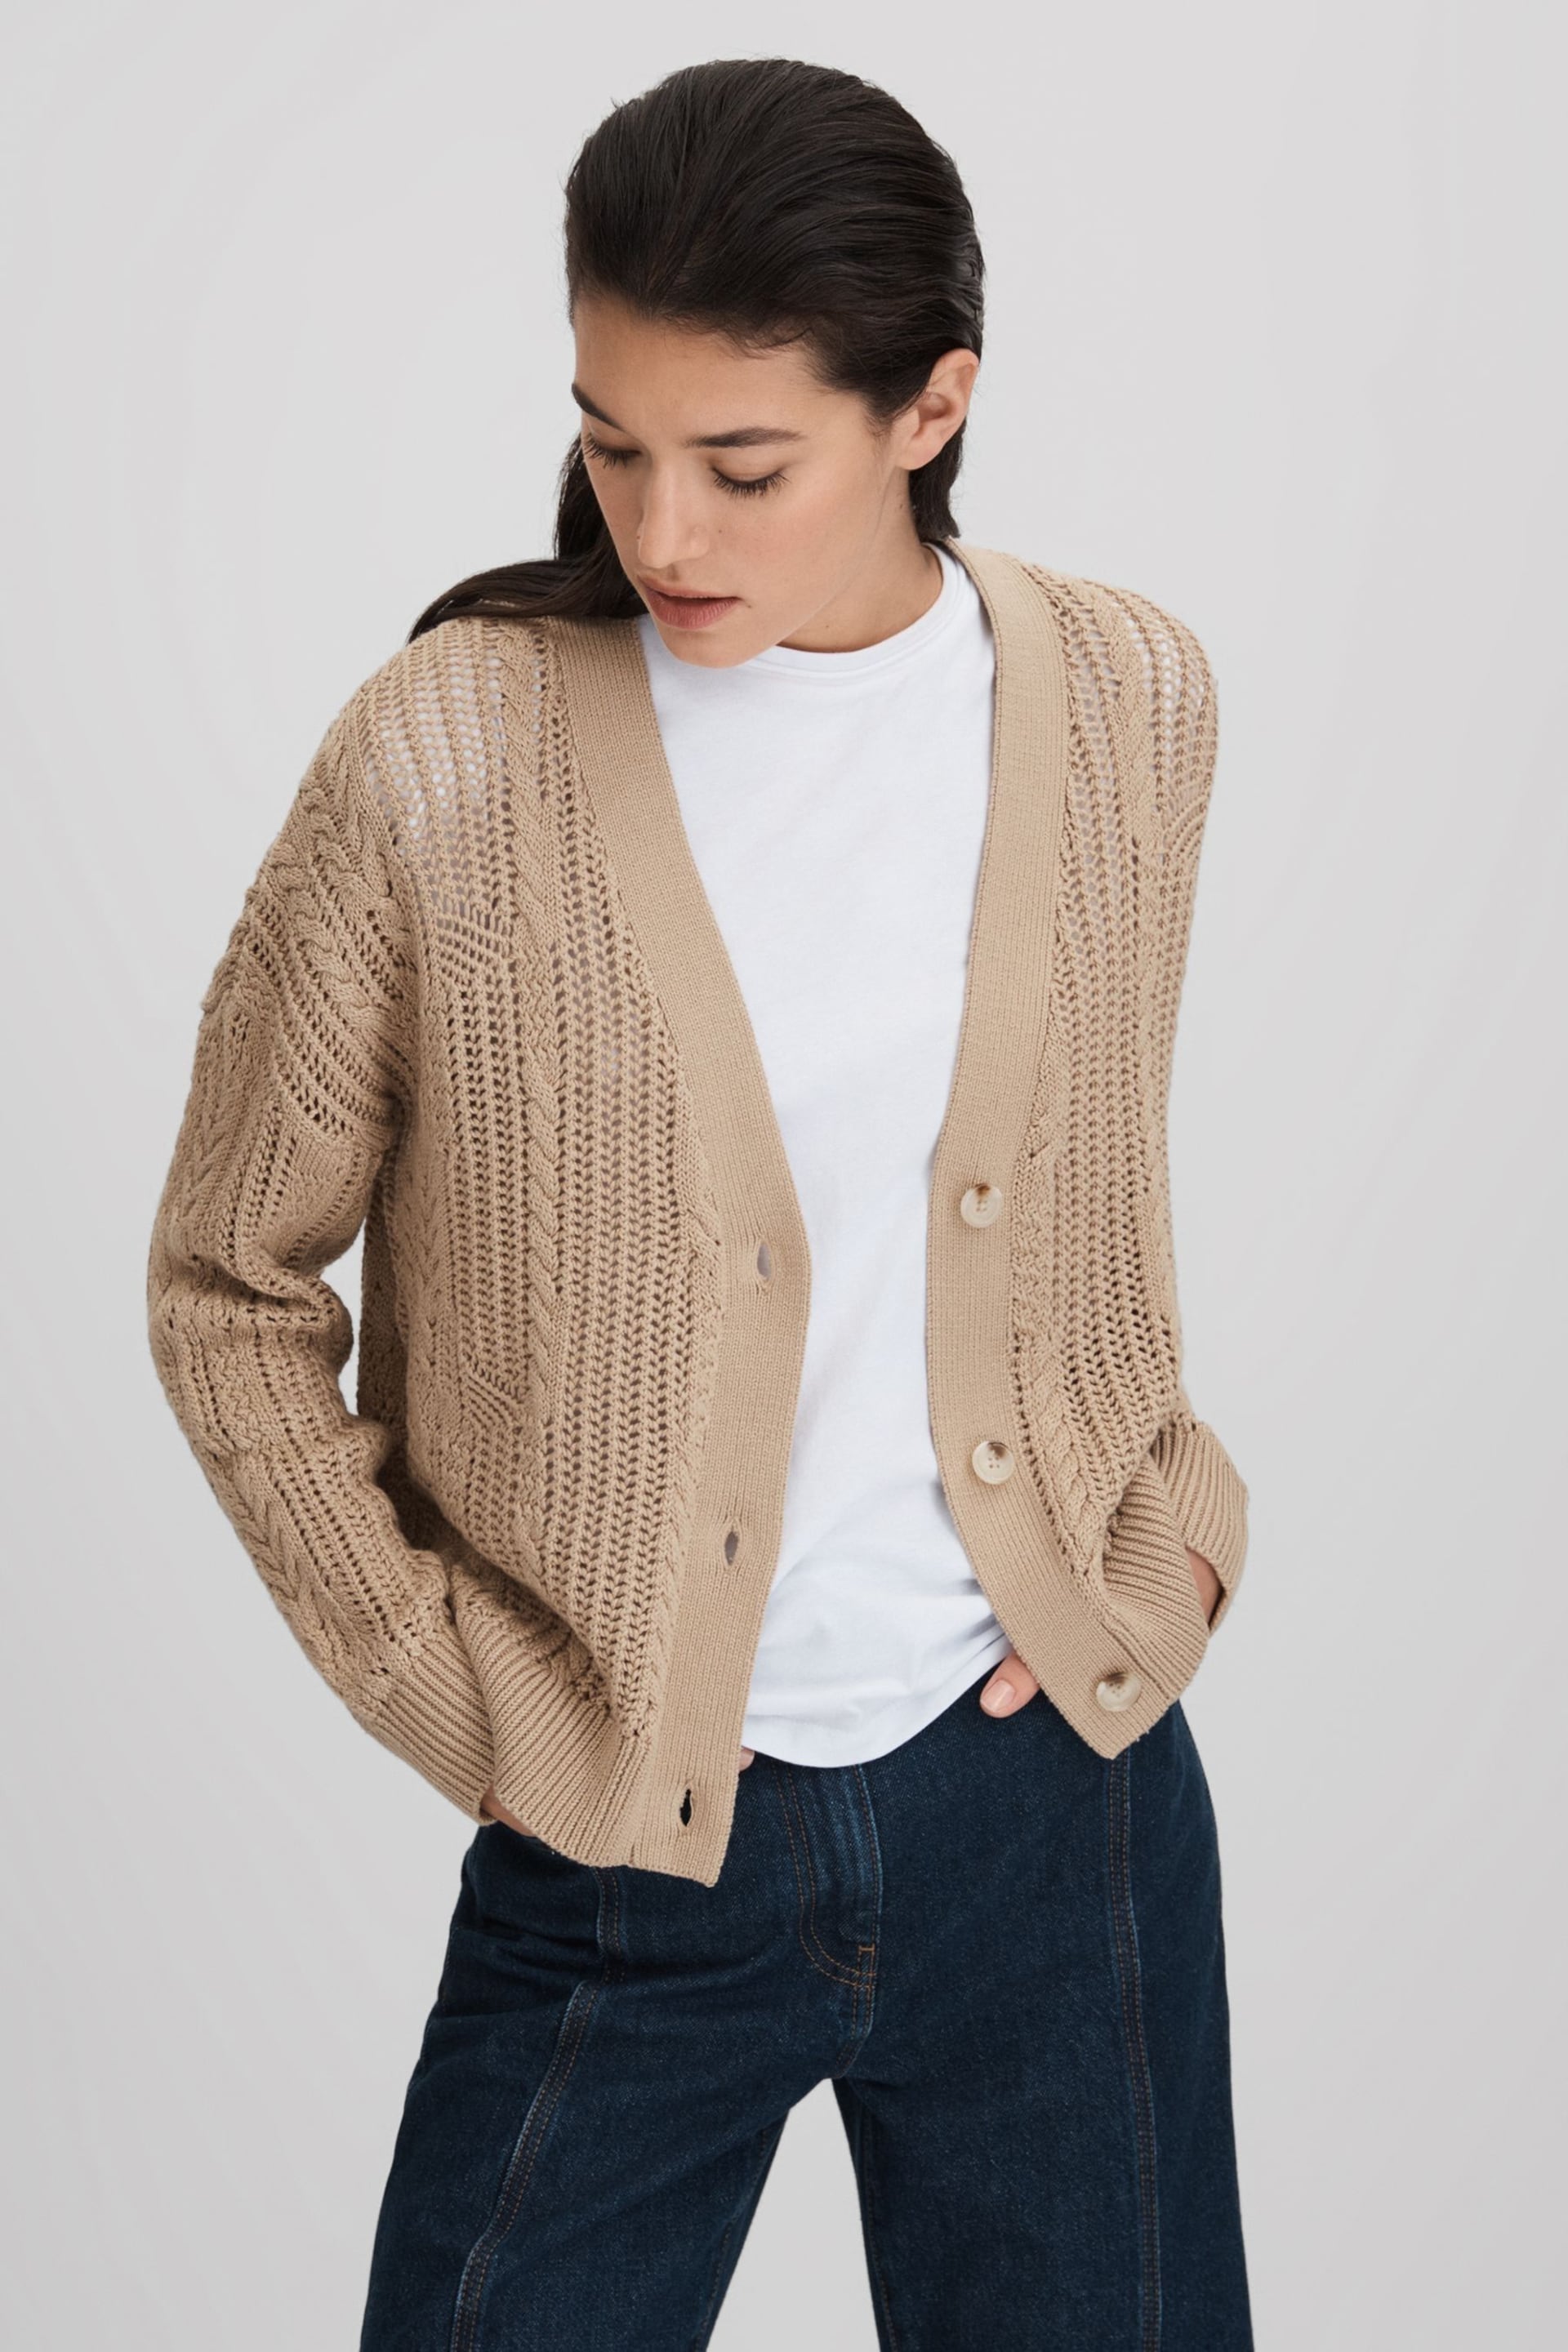 Reiss Neutral Tiffany Cotton Blend Open Stitch Cardigan - Image 3 of 6